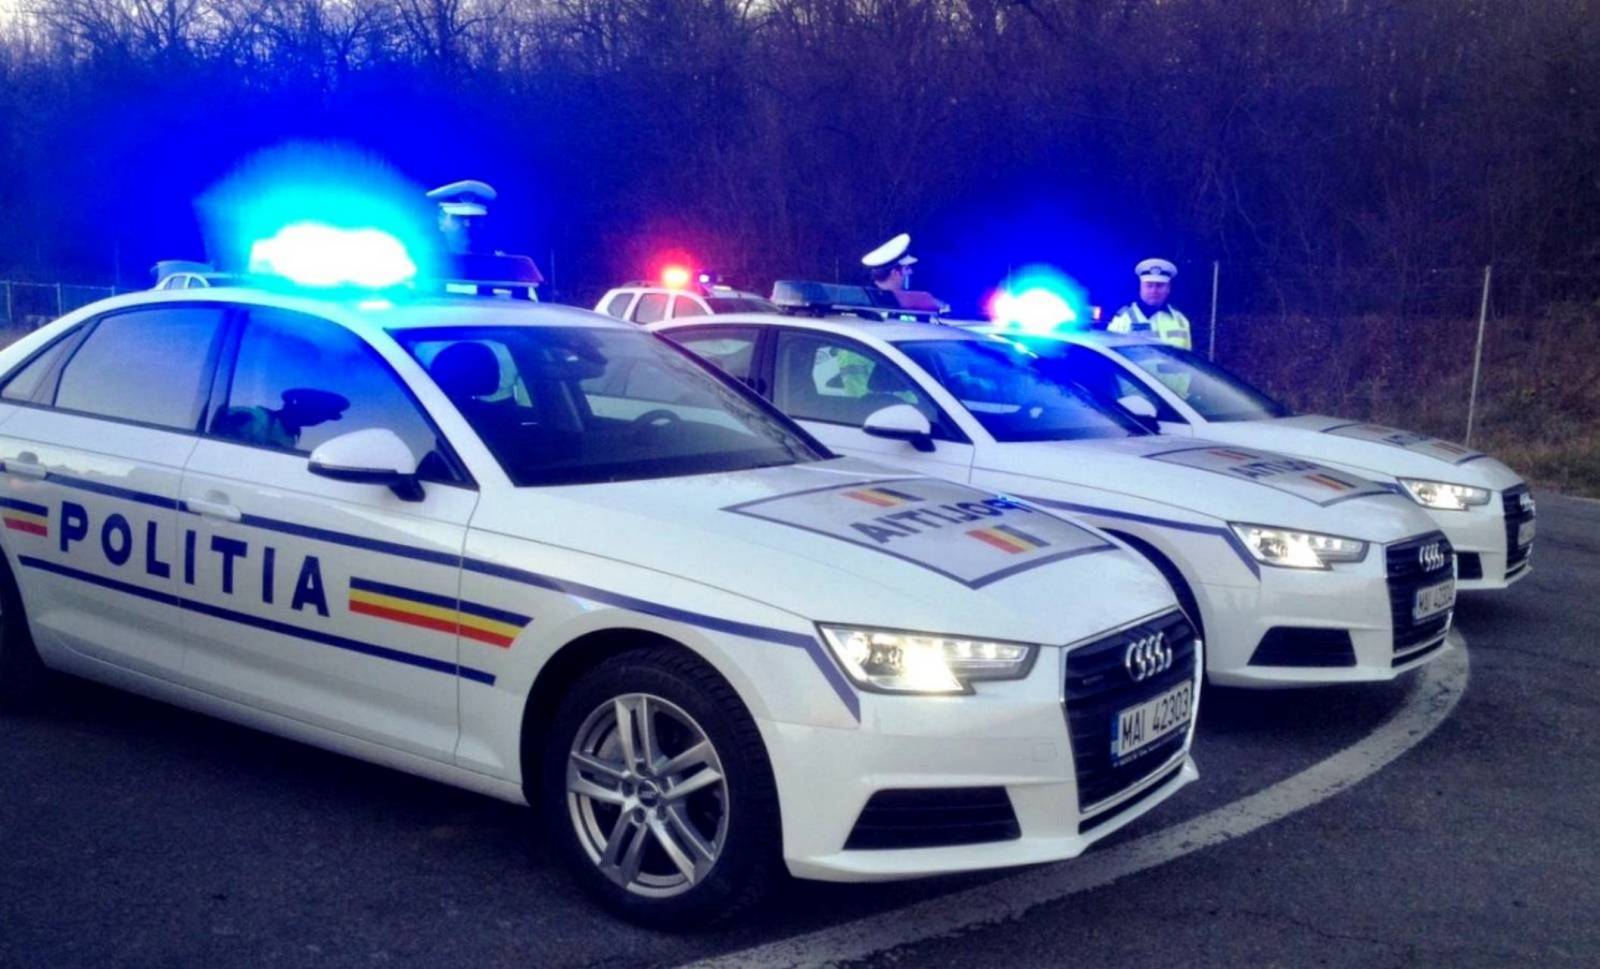 Romanian Police Number Signed Fines Cause COVID-19 Last 24 hours